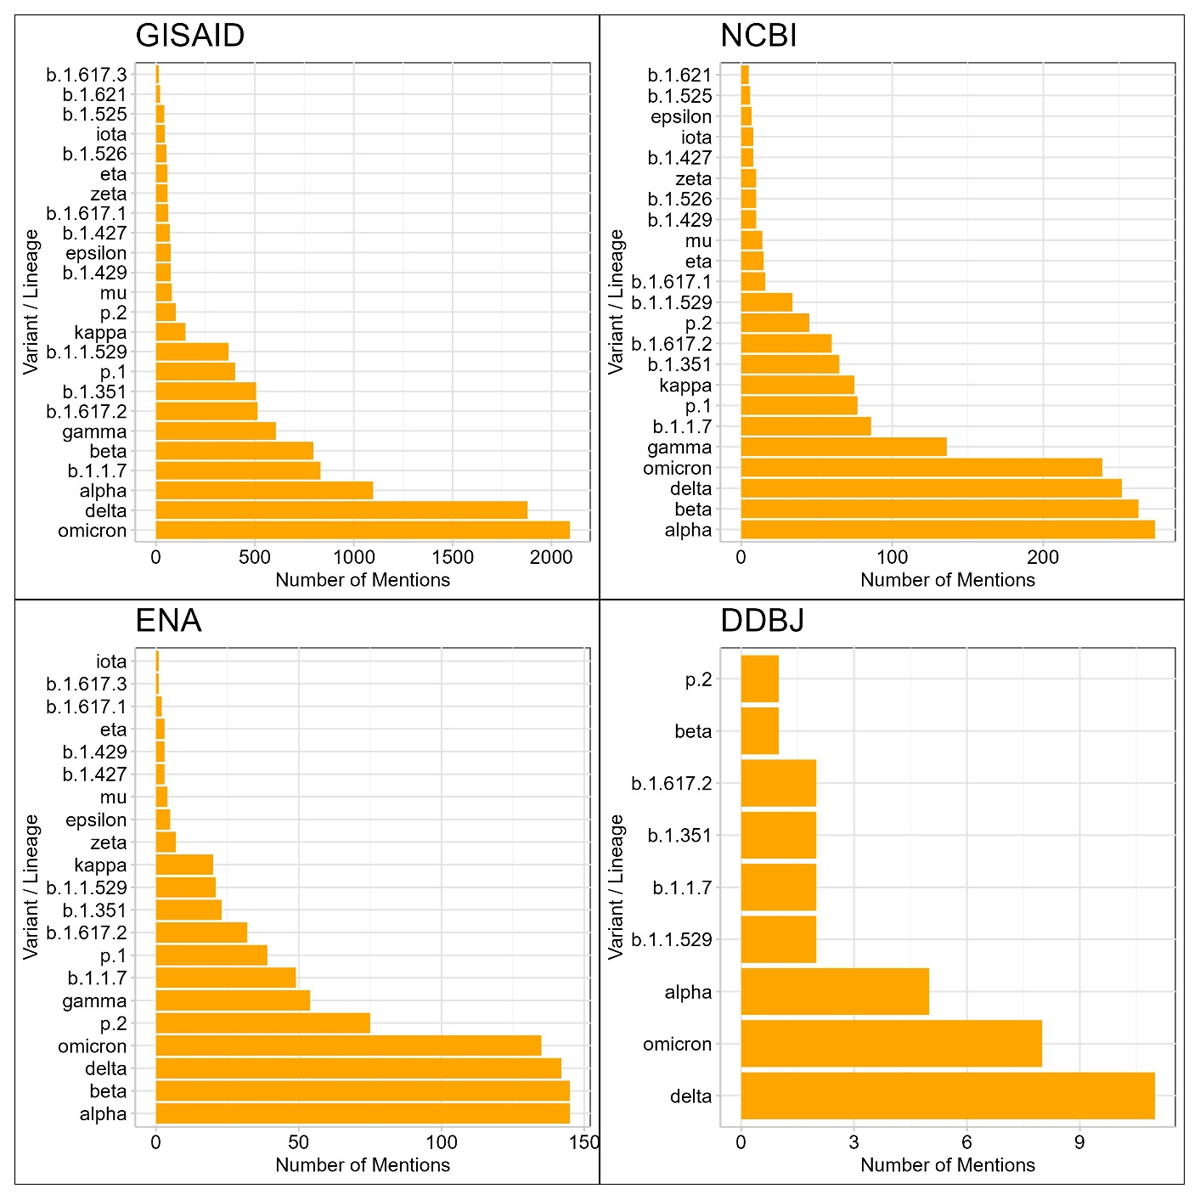 Frequency distribution of viral variants mentioned in abstracts across major SARS-CoV-2 repositories